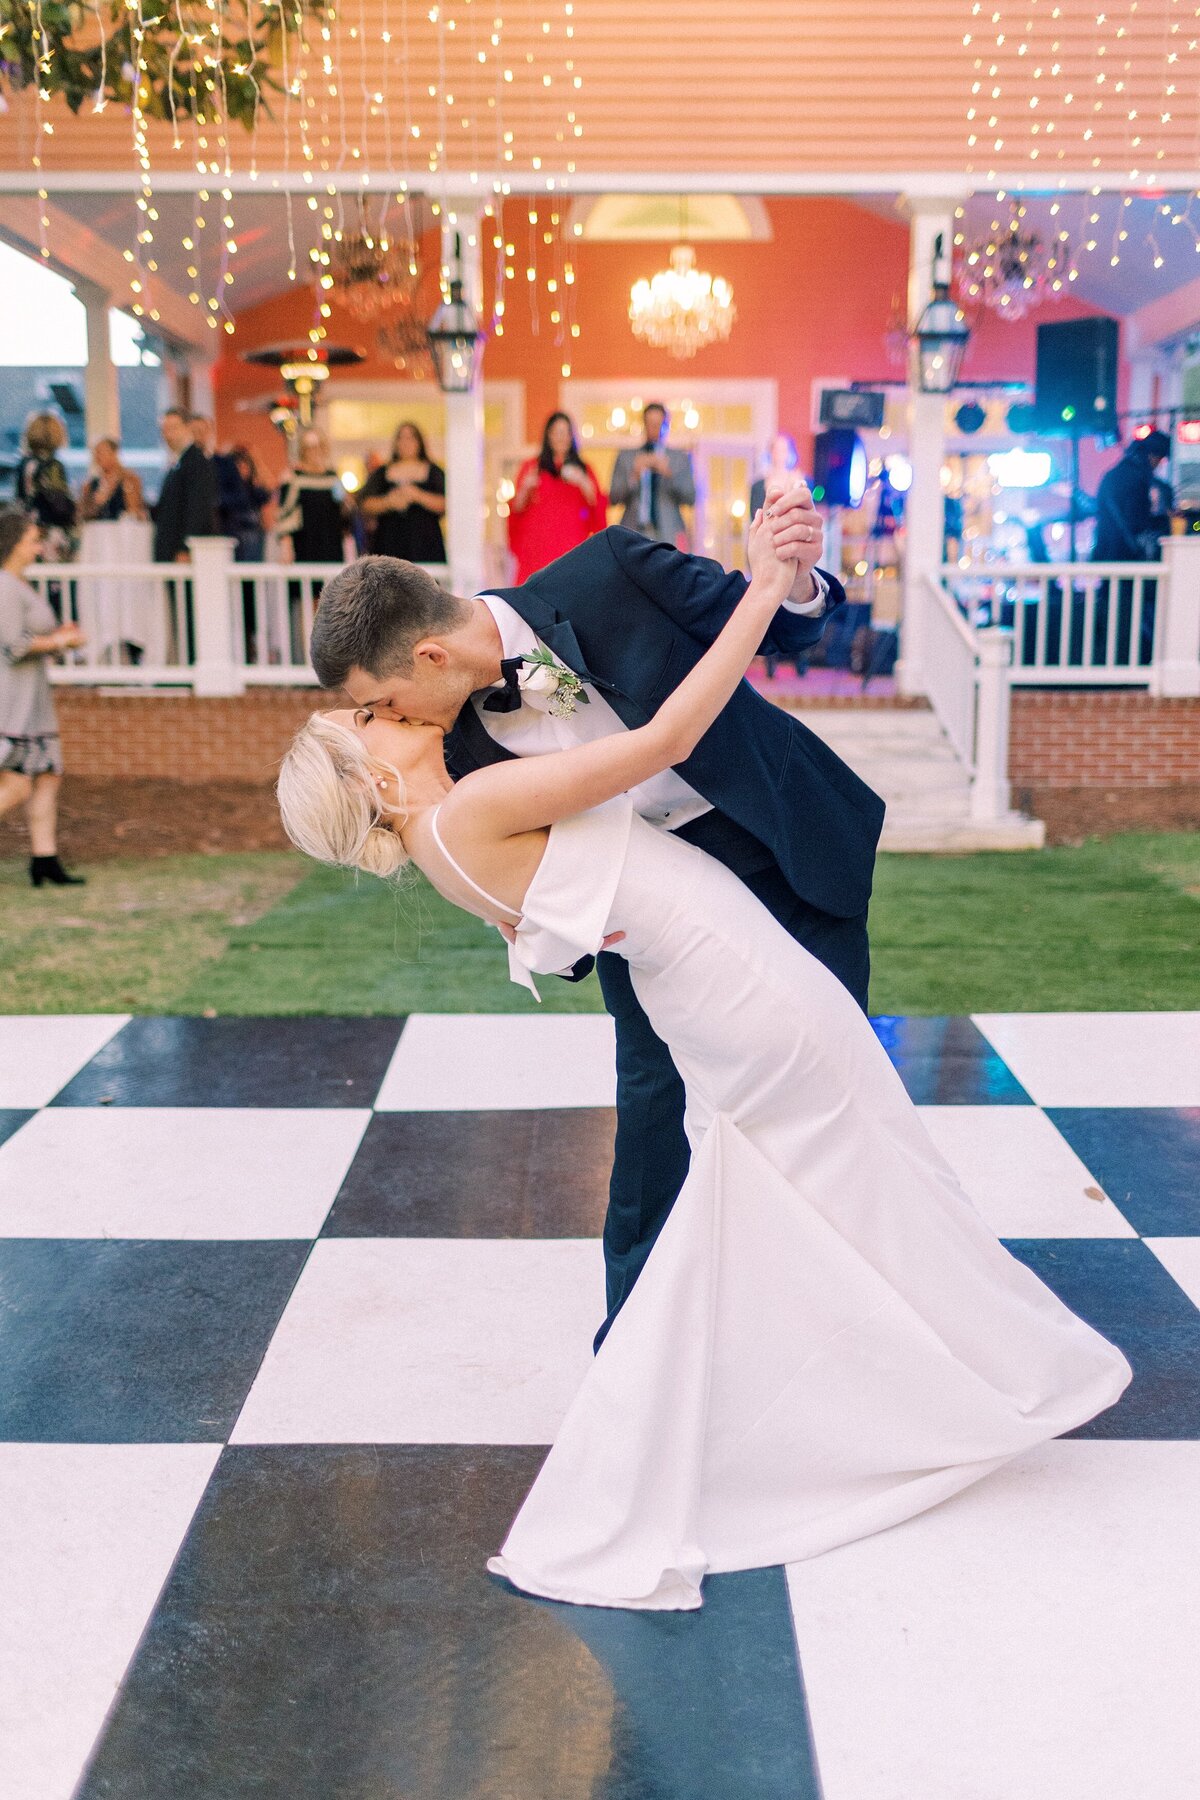 Groom dips his bride during their first dance